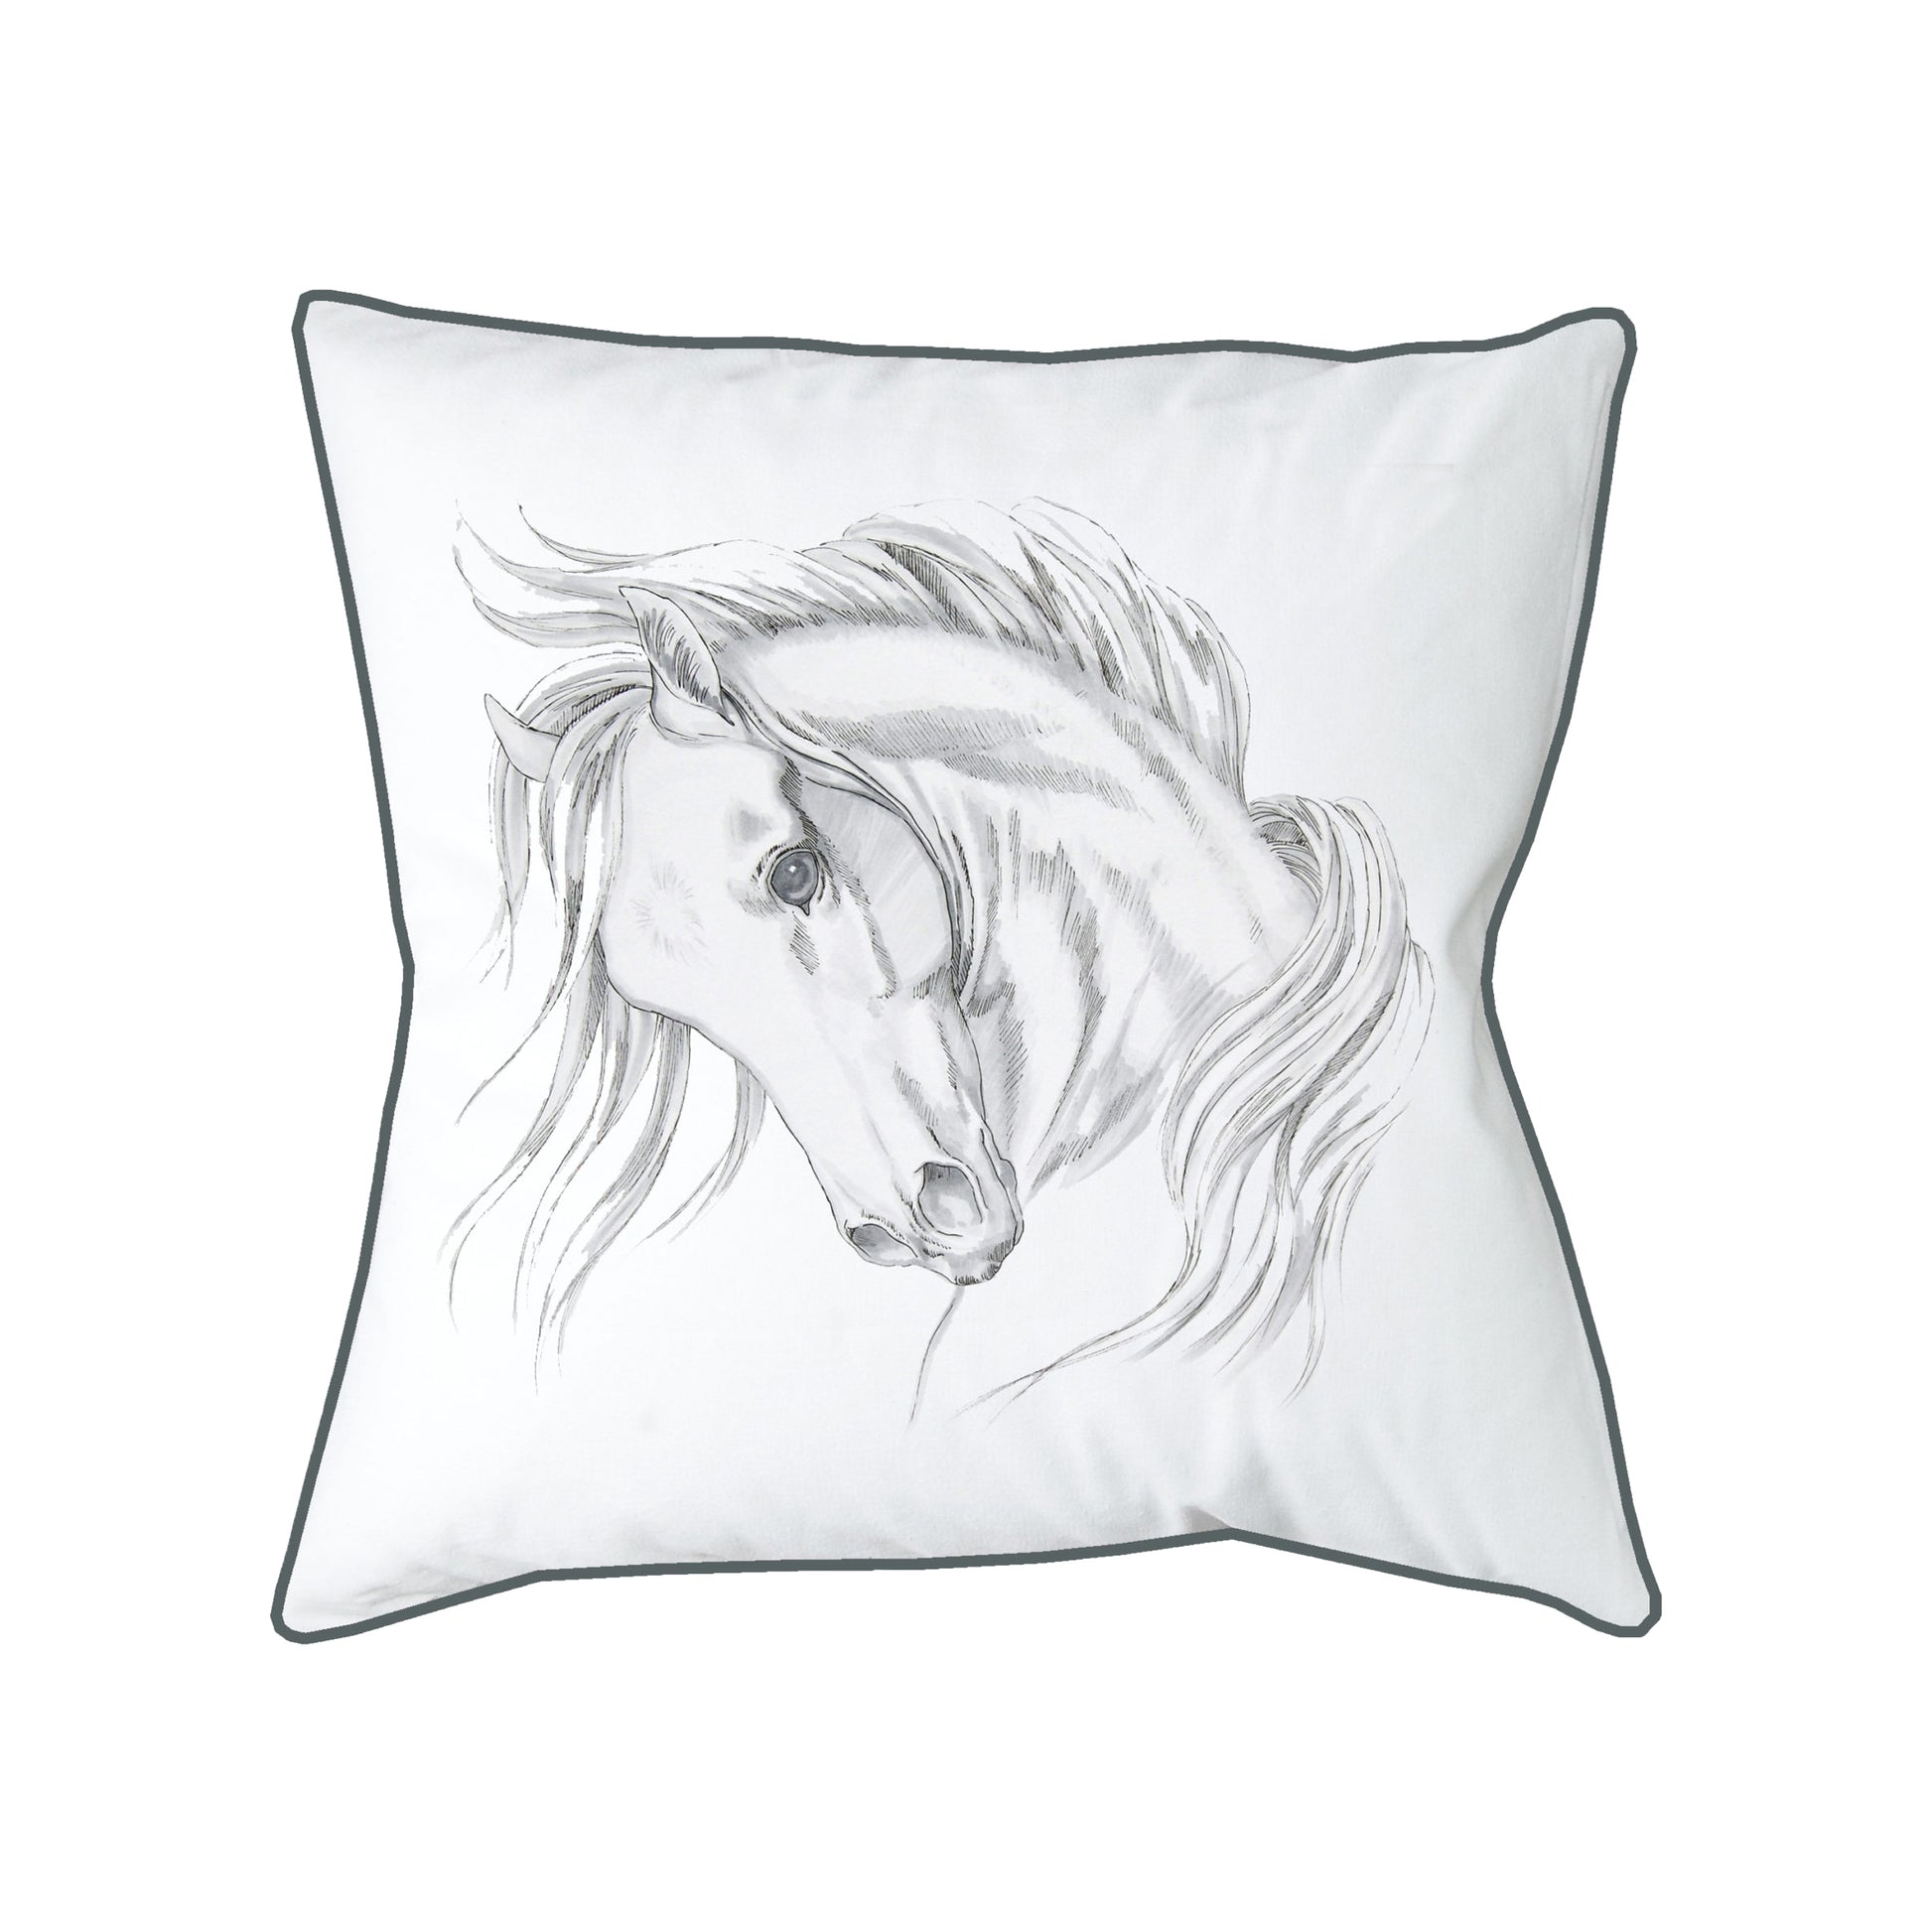 Bowing horse head embroidered on a white background.